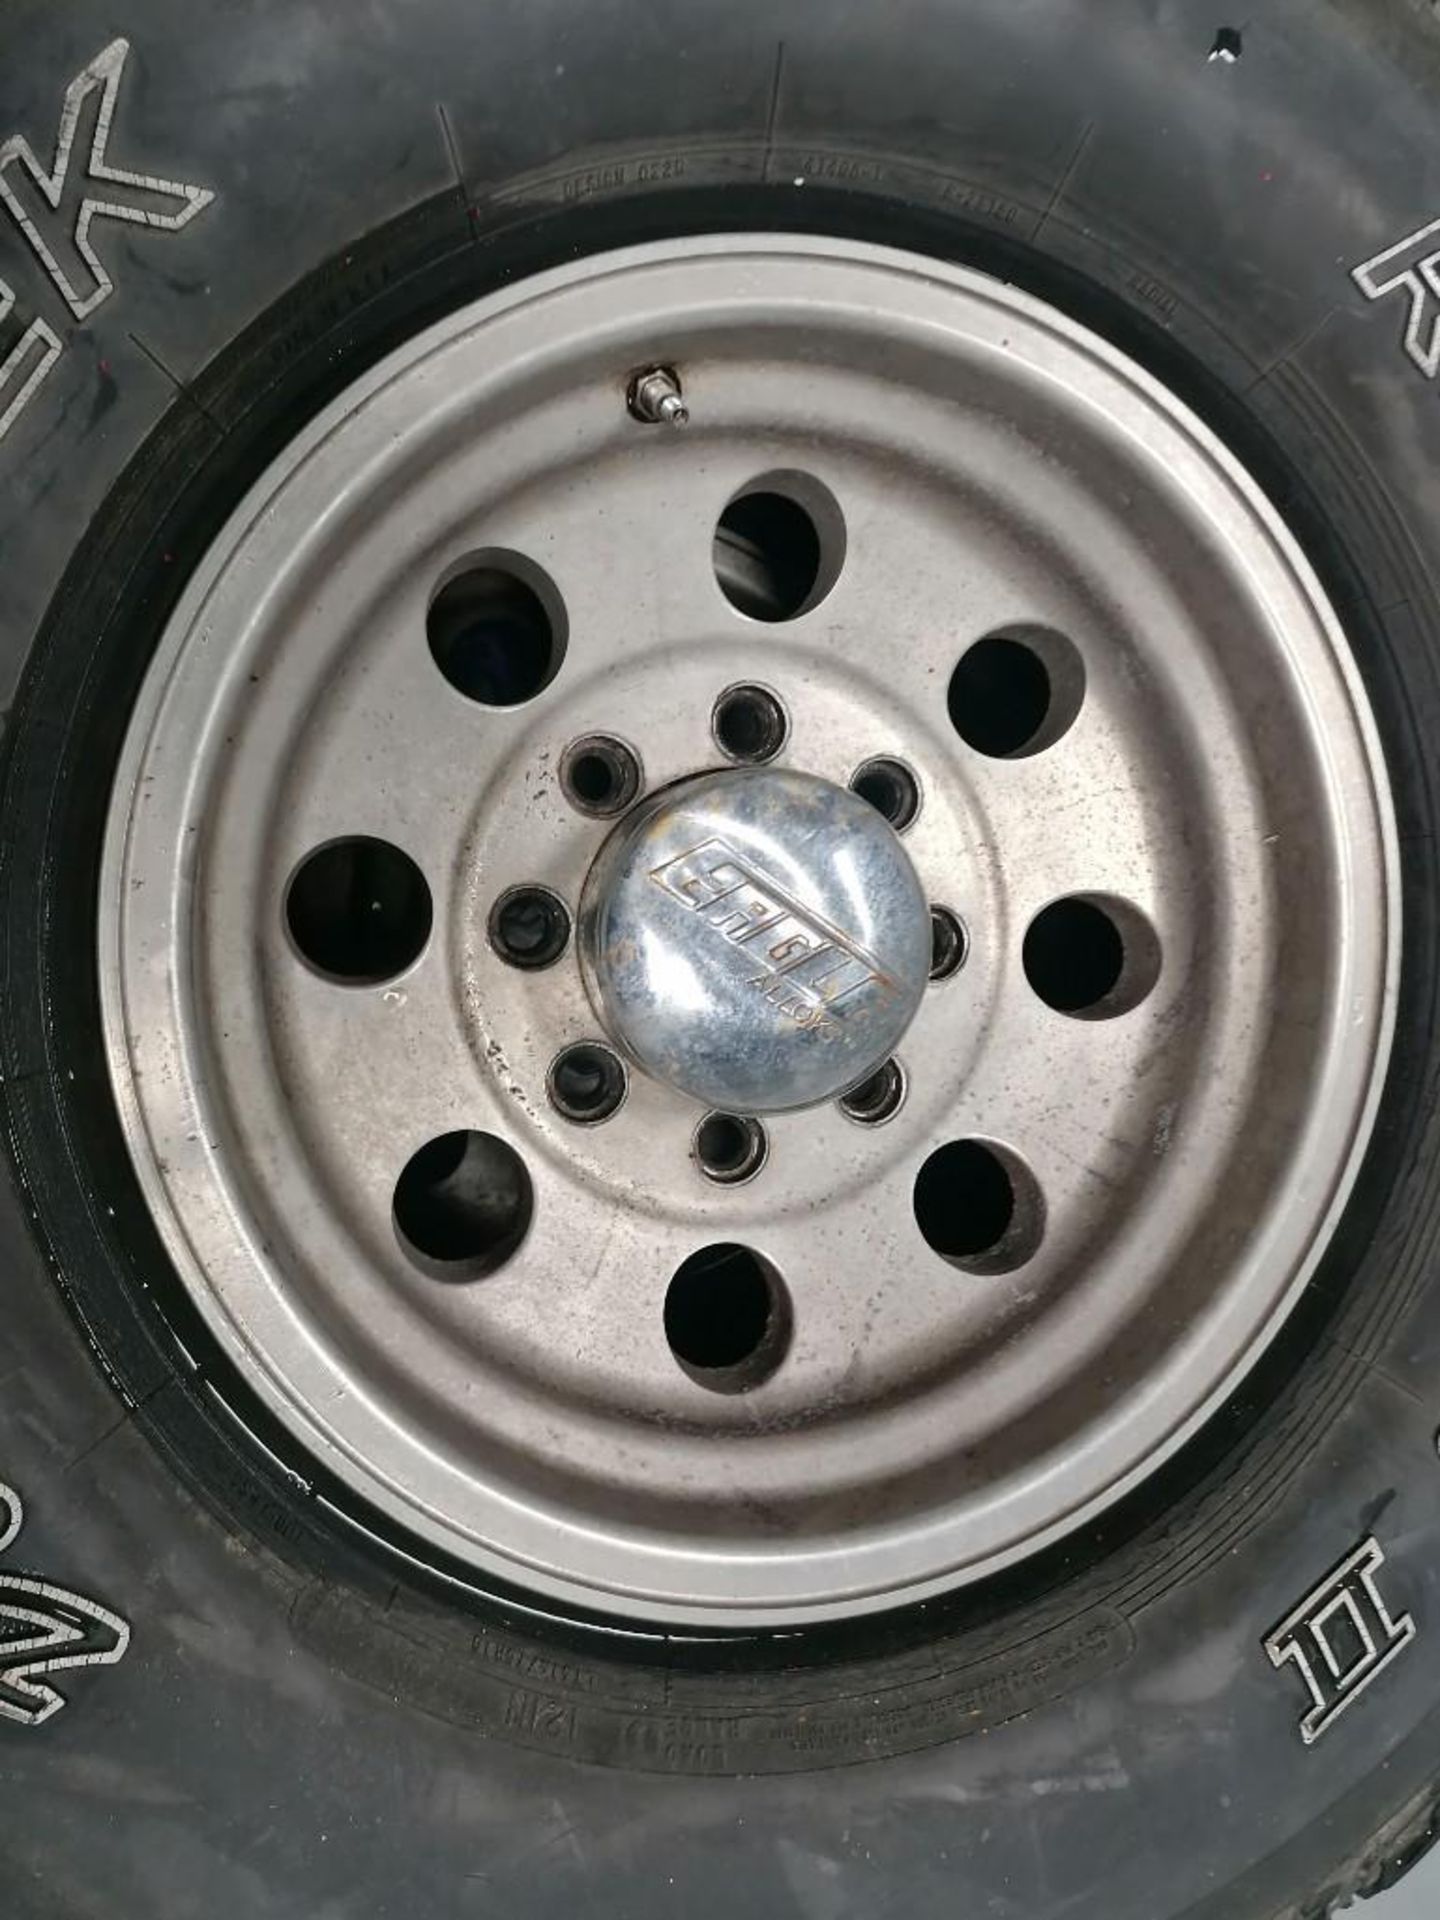 (4) Dick CEPEX Radial F-C II LT315 / 75 R16 Tires with 8 Hole Pattern Rims. Located in Mt. Pleasant, - Image 10 of 10